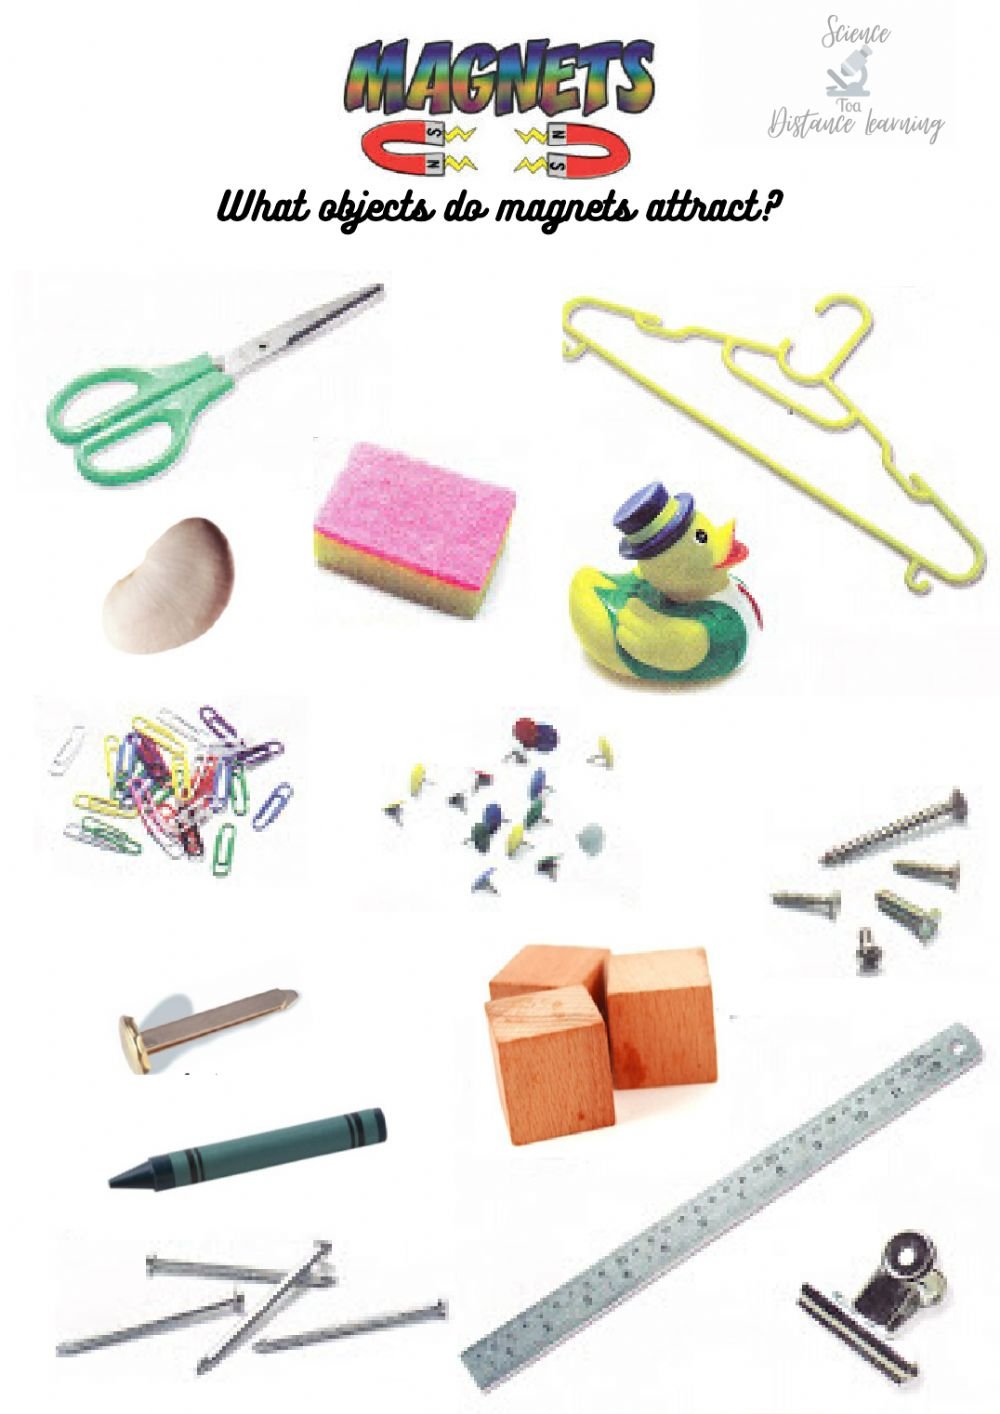 Classroom Objects Magnet Attraction Worksheets WorksheetsCity